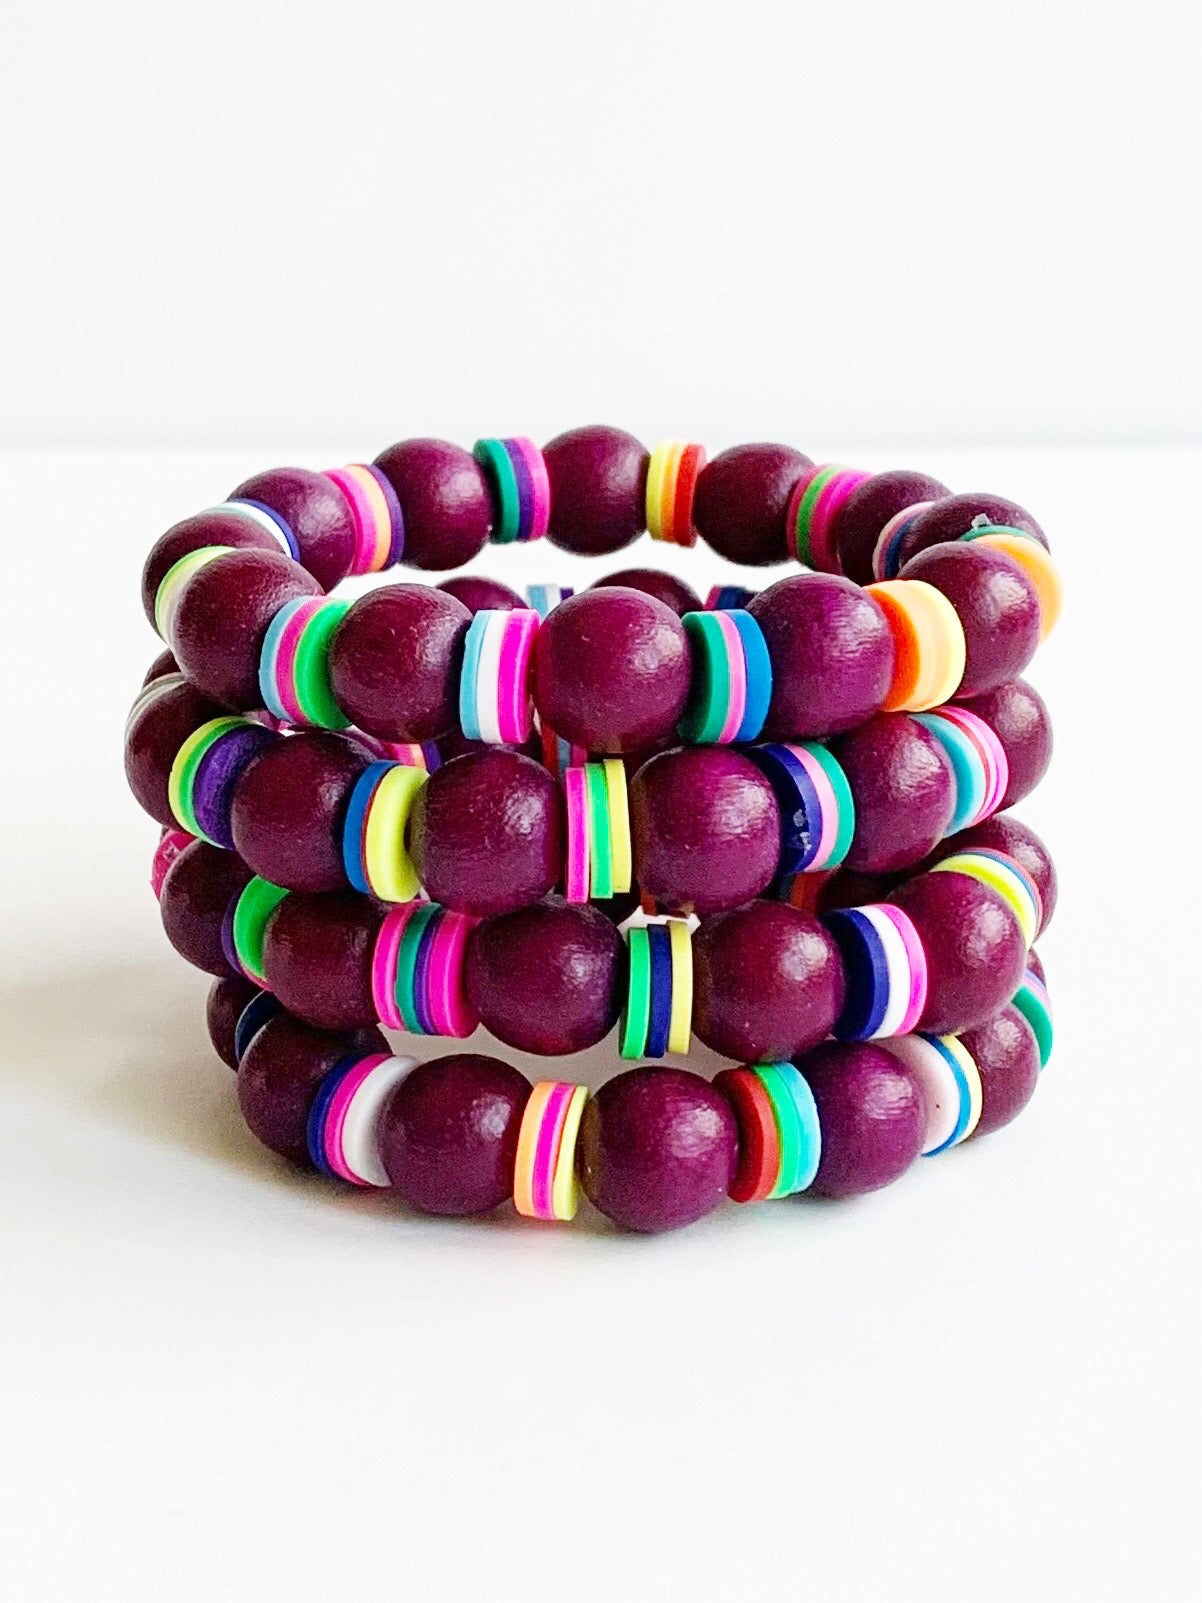 Four Child sized Plum and rainbow confetti beaded stretch bracelets stacked.